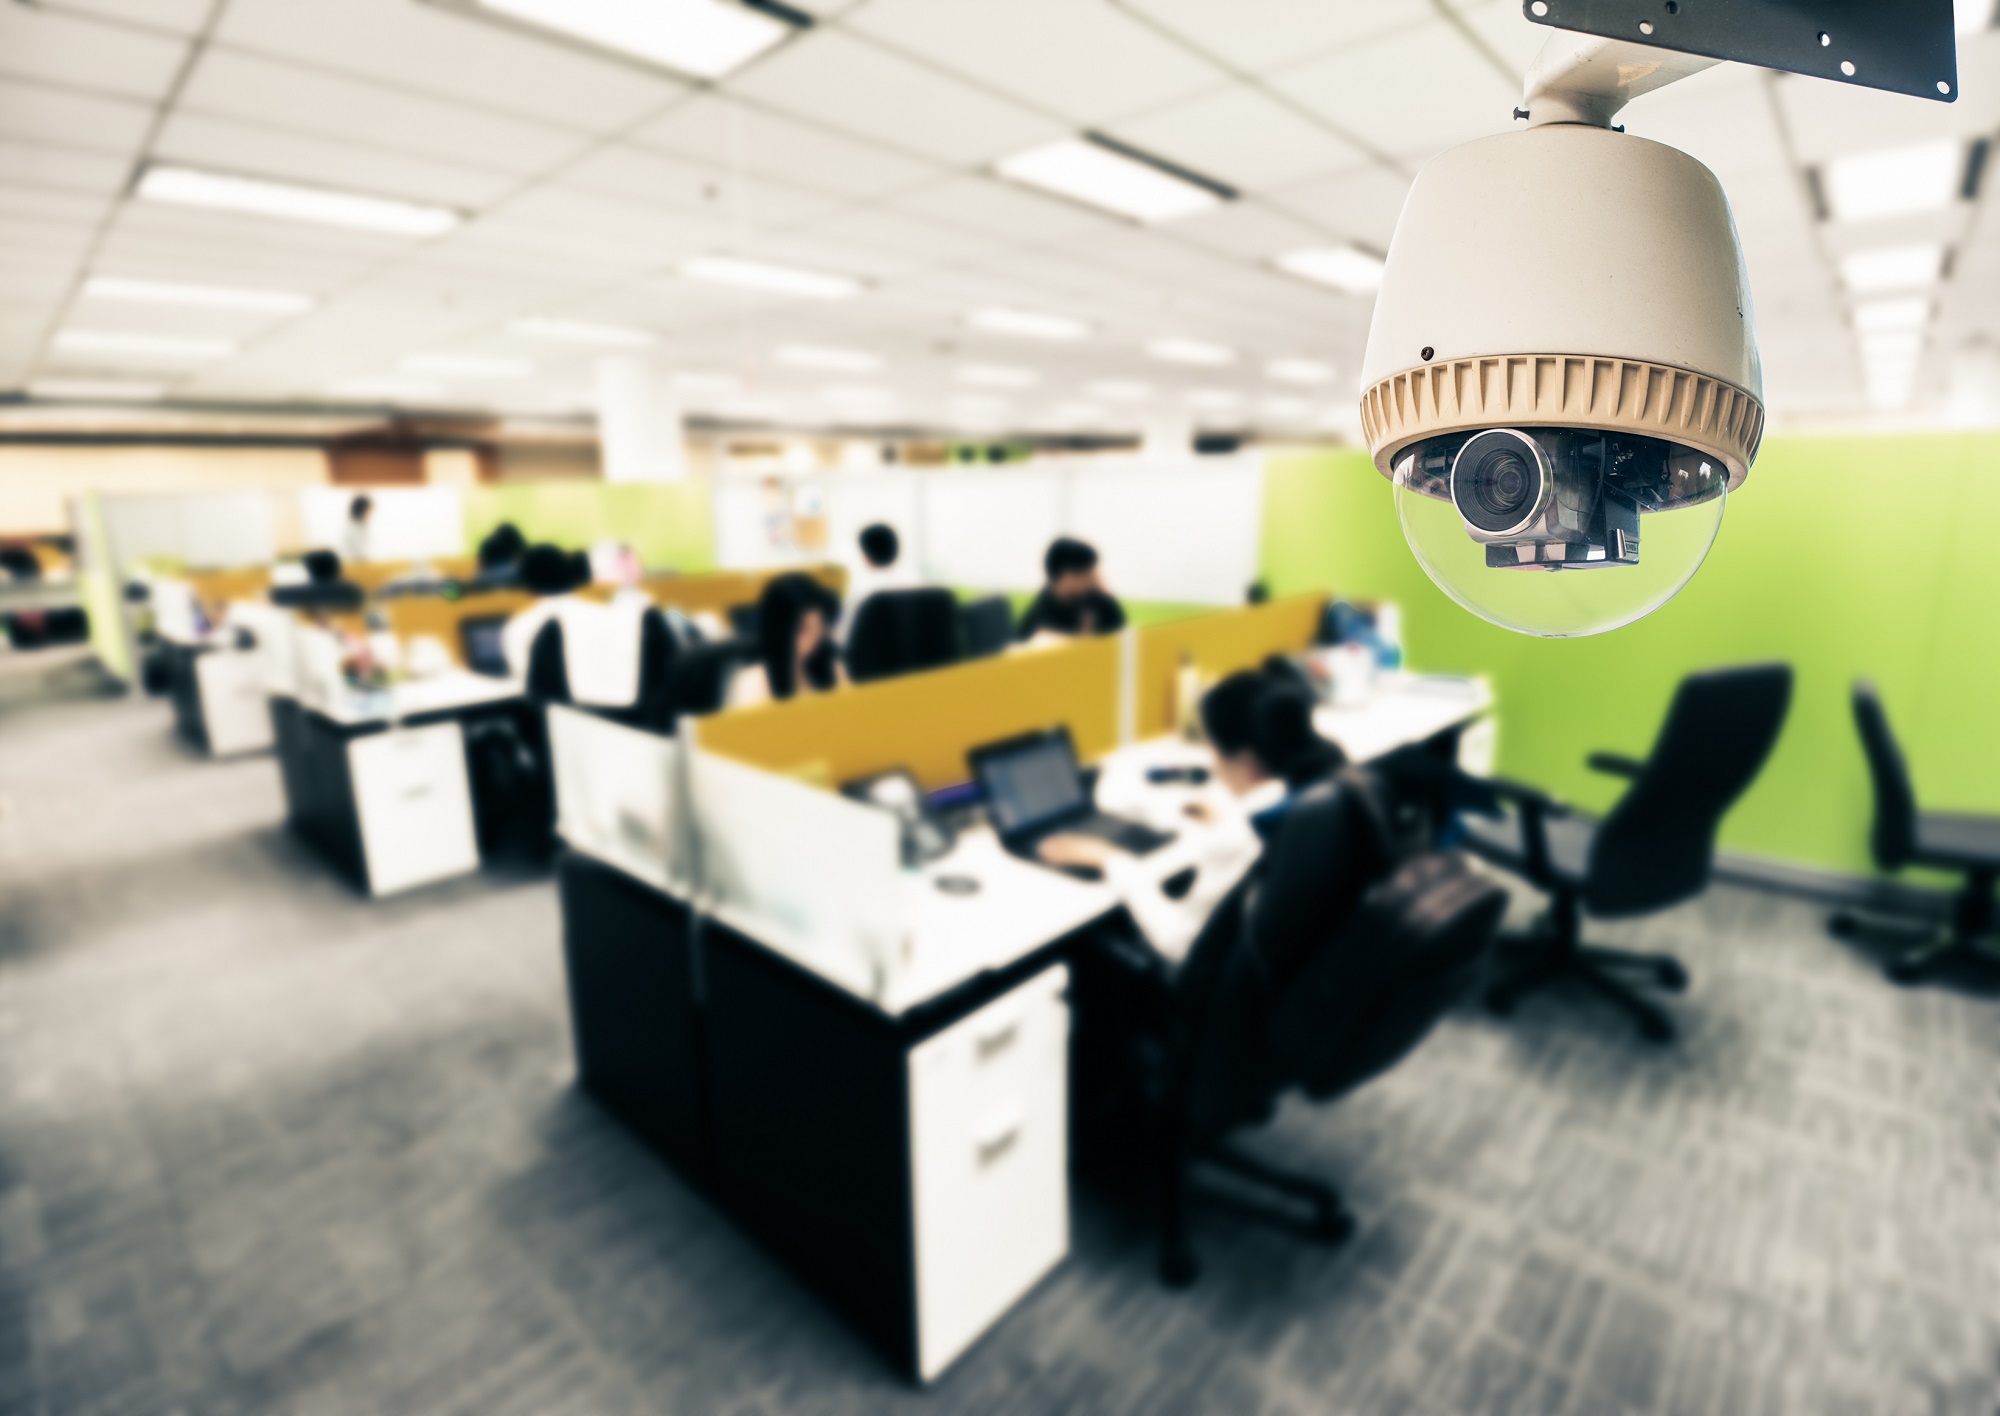 Surveillance in the Workplace: Protecting Productivity or Invading Privacy?